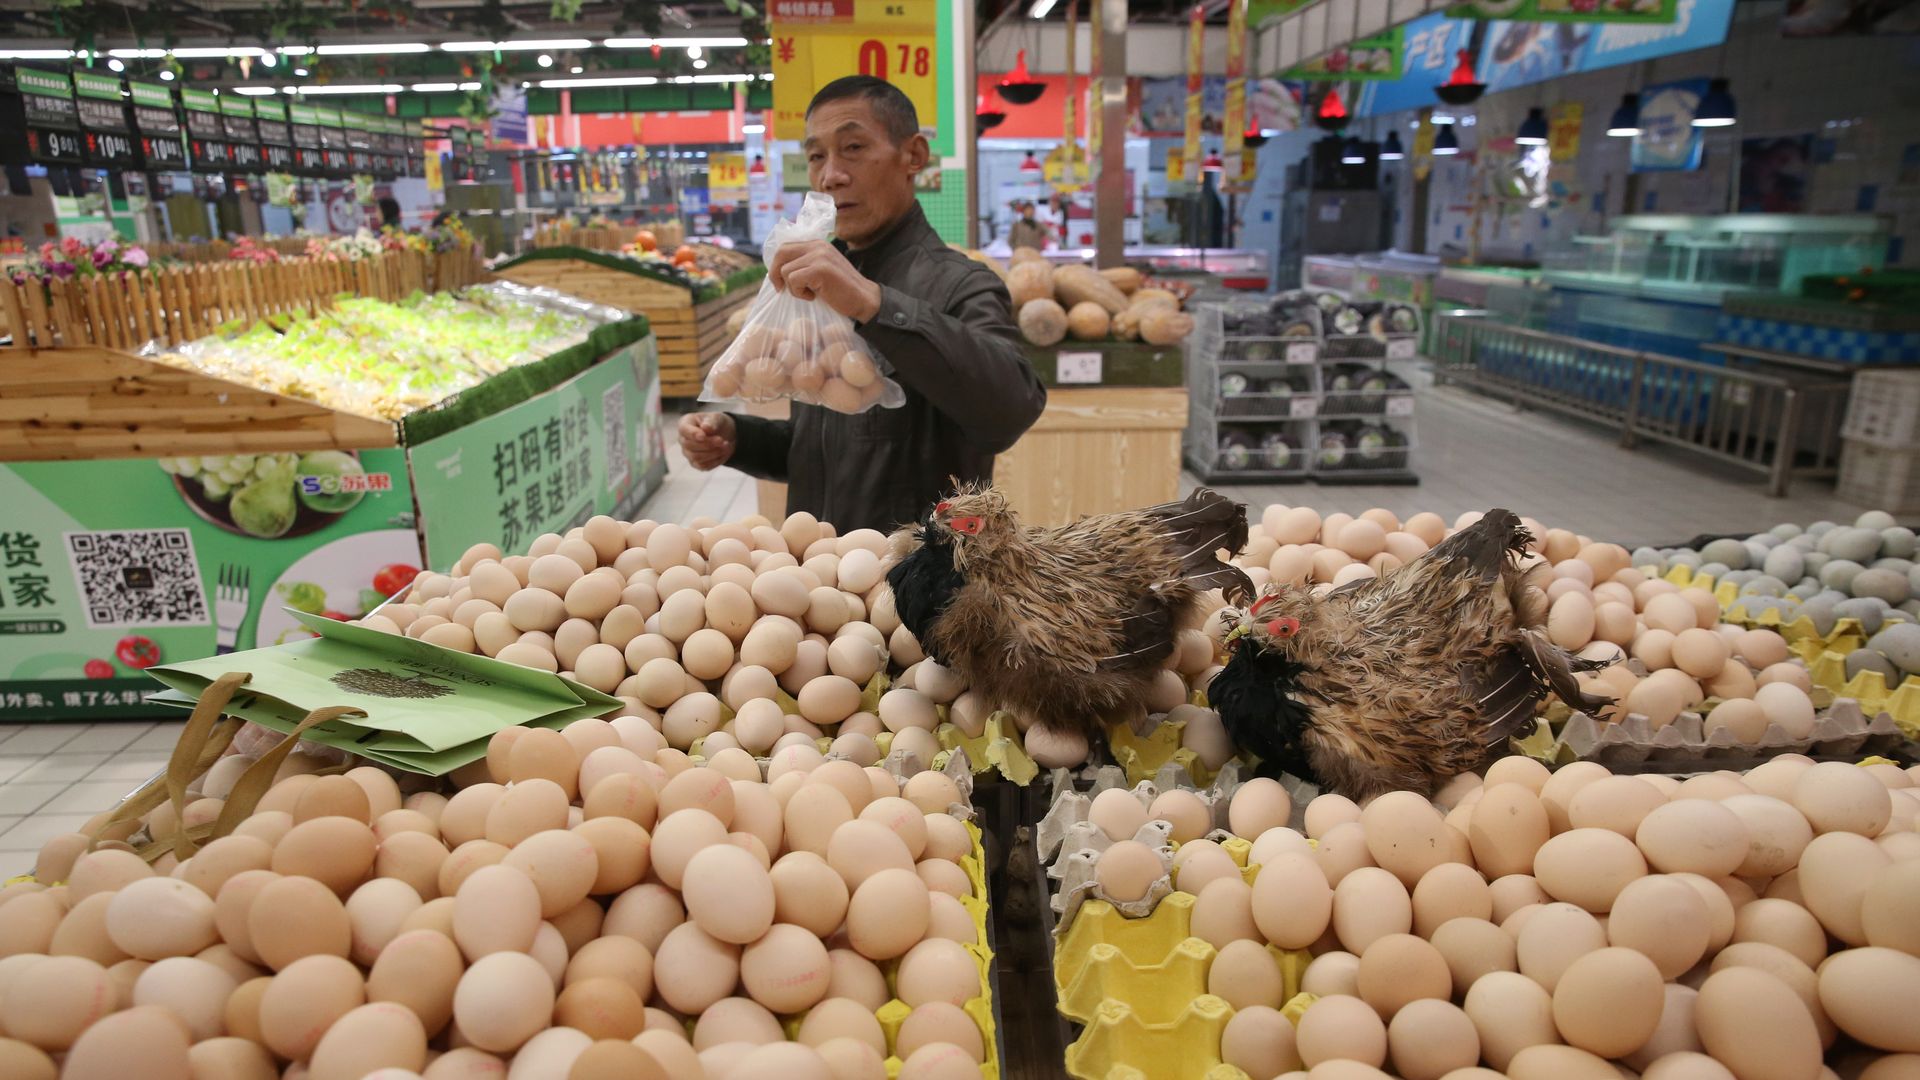 In this image, a man stands holding a plastic bag of eggs while standing in front of two large crates of eggs with two chickens standing on top.